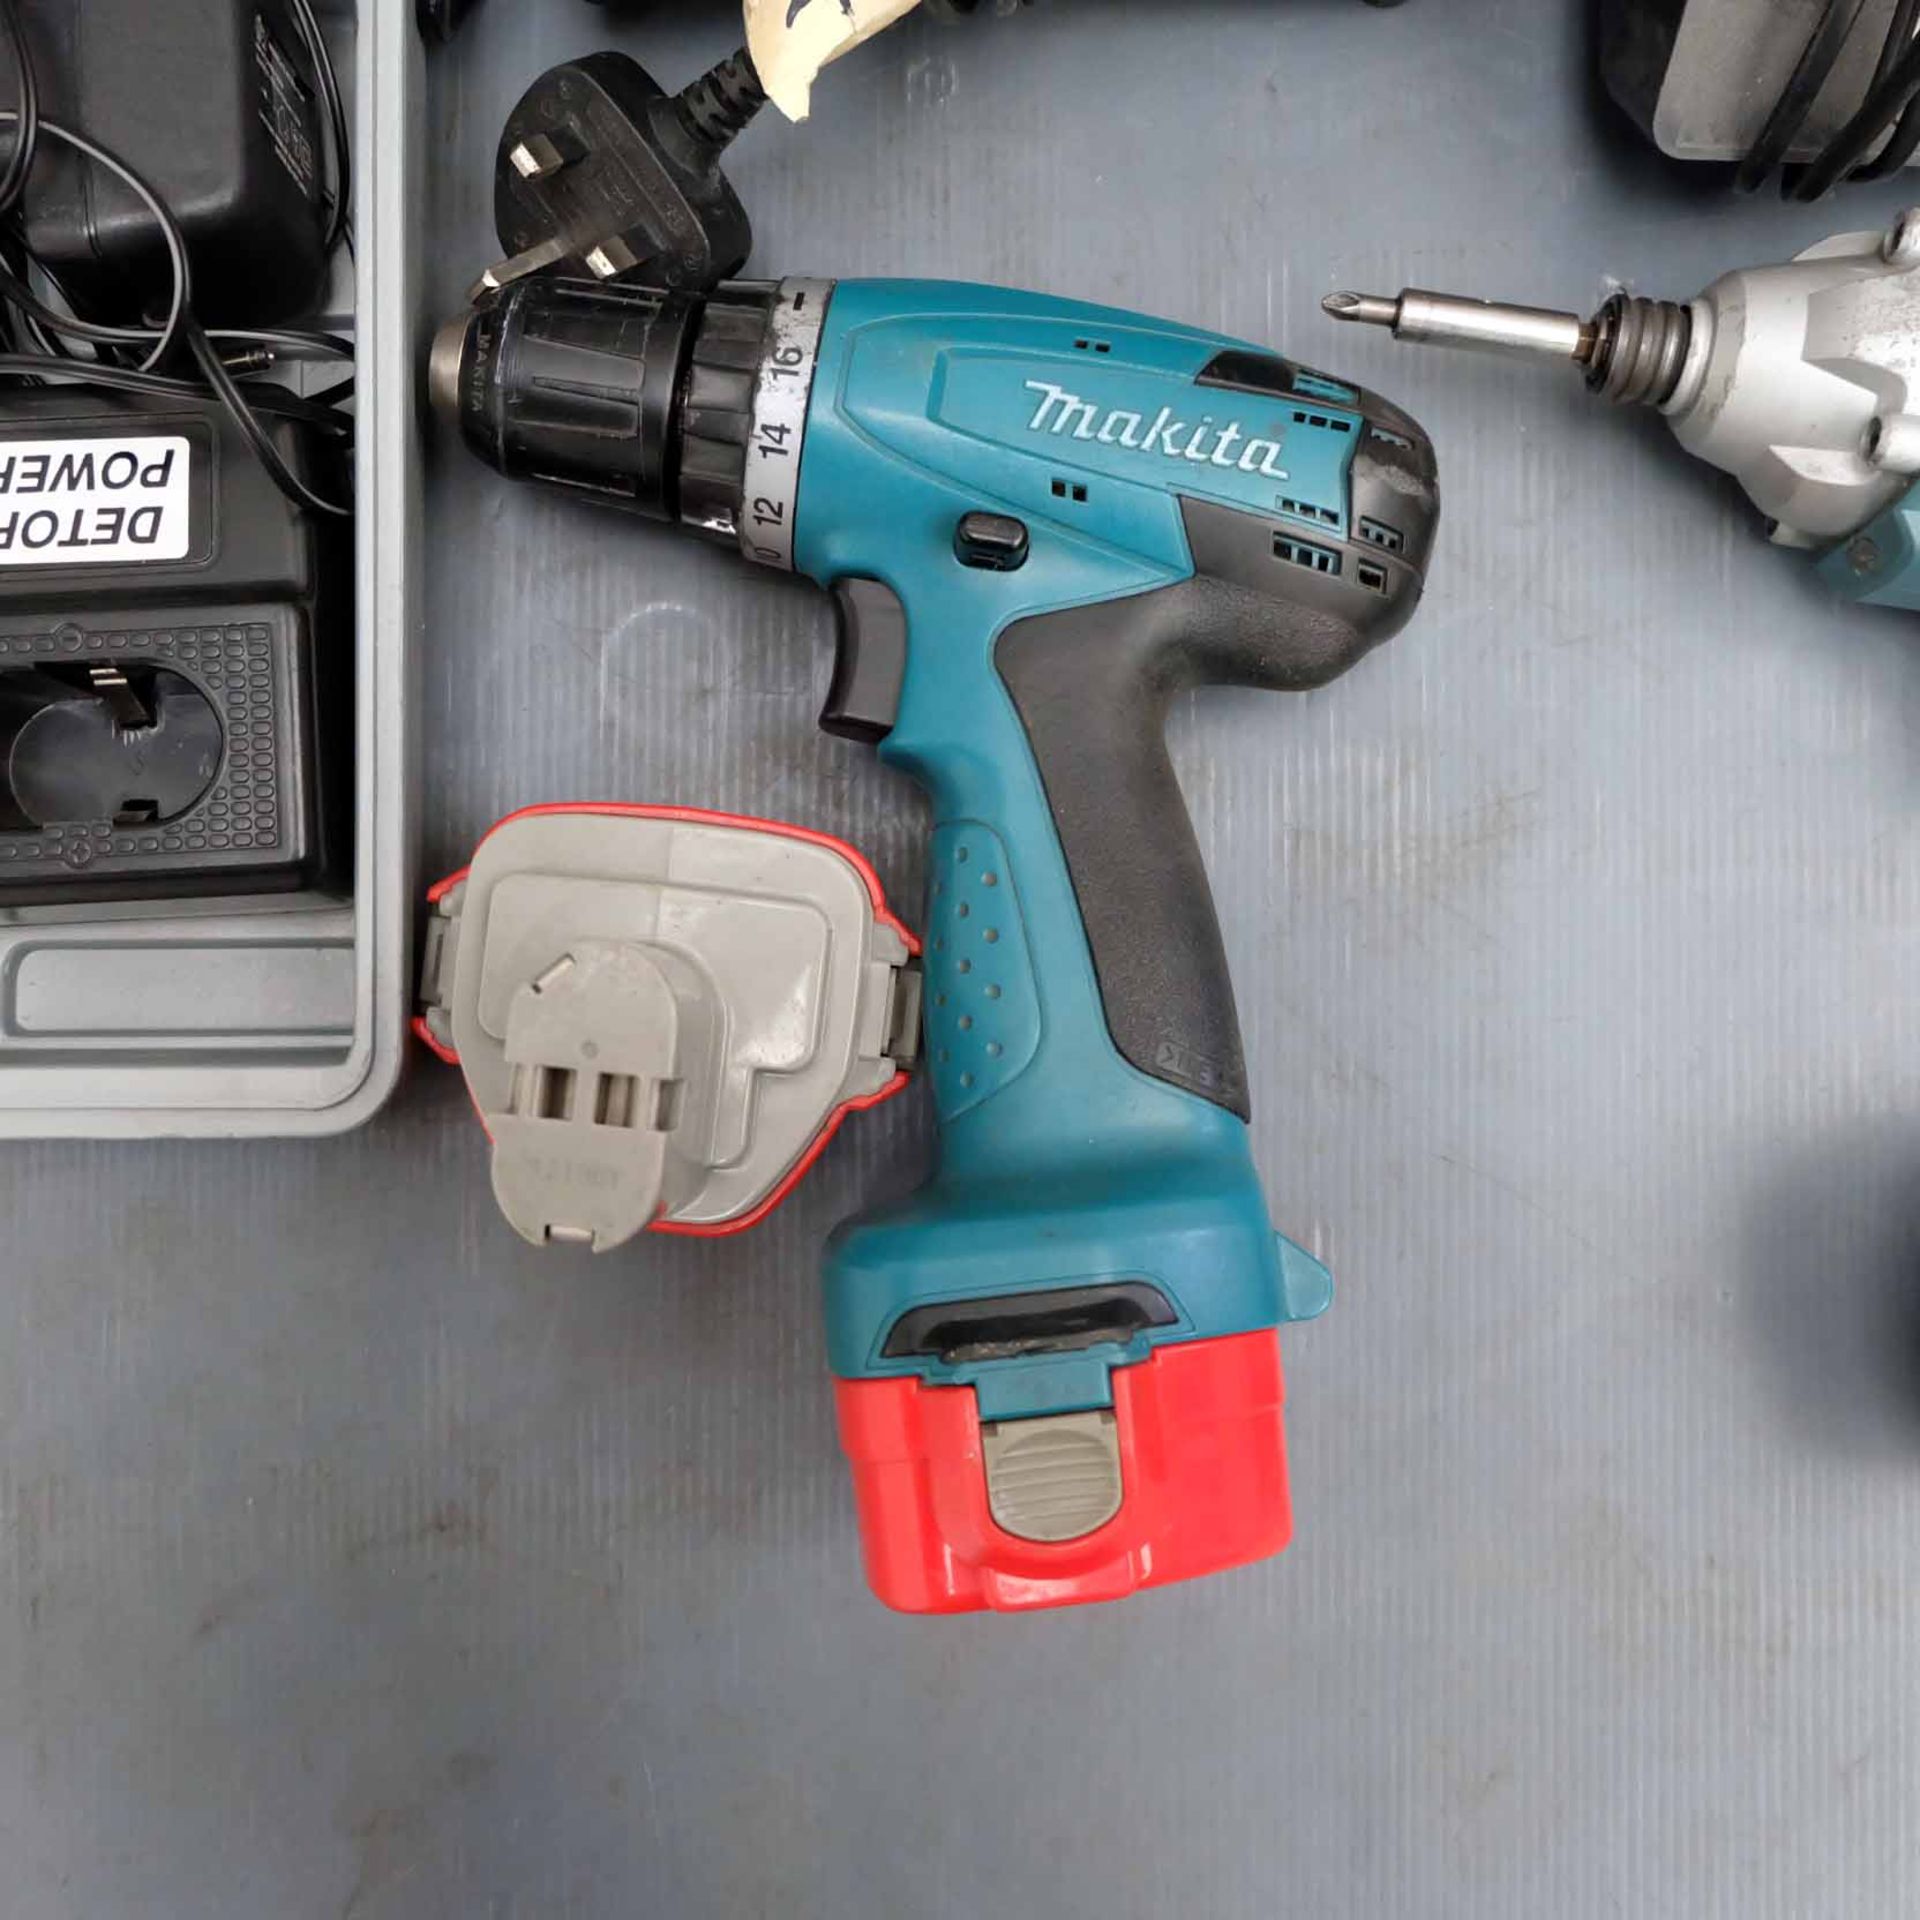 Quantity of 3 Drills. Includes Erbauer Drill With Charger & 2 Batteries (Working). Makita Drill With - Image 3 of 7